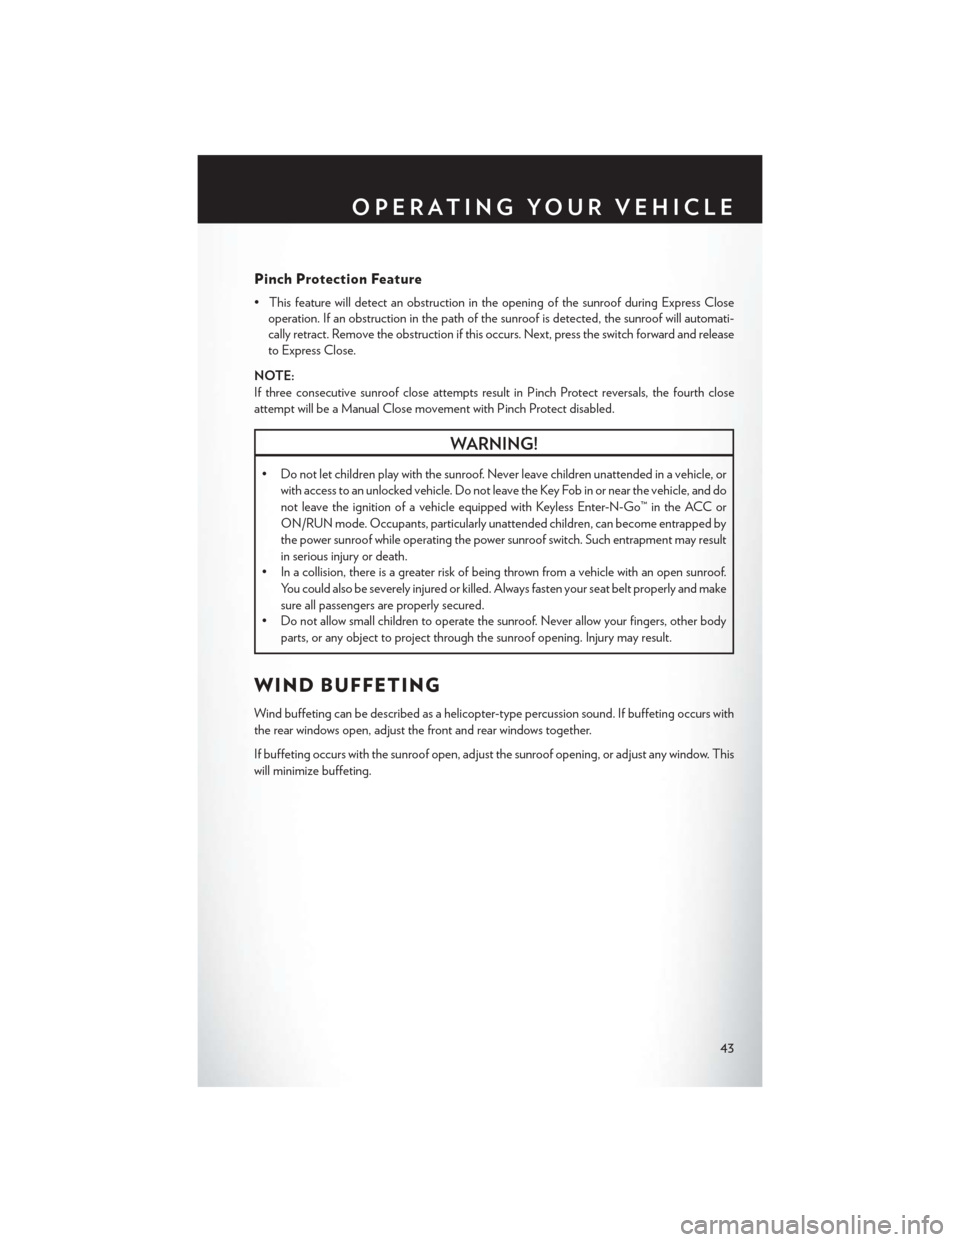 CHRYSLER TOWN AND COUNTRY 2014 5.G Service Manual Pinch Protection Feature
• This feature will detect an obstruction in the opening of the sunroof during Express Closeoperation. If an obstruction in the path of the sunroof is detected, the sunroof 